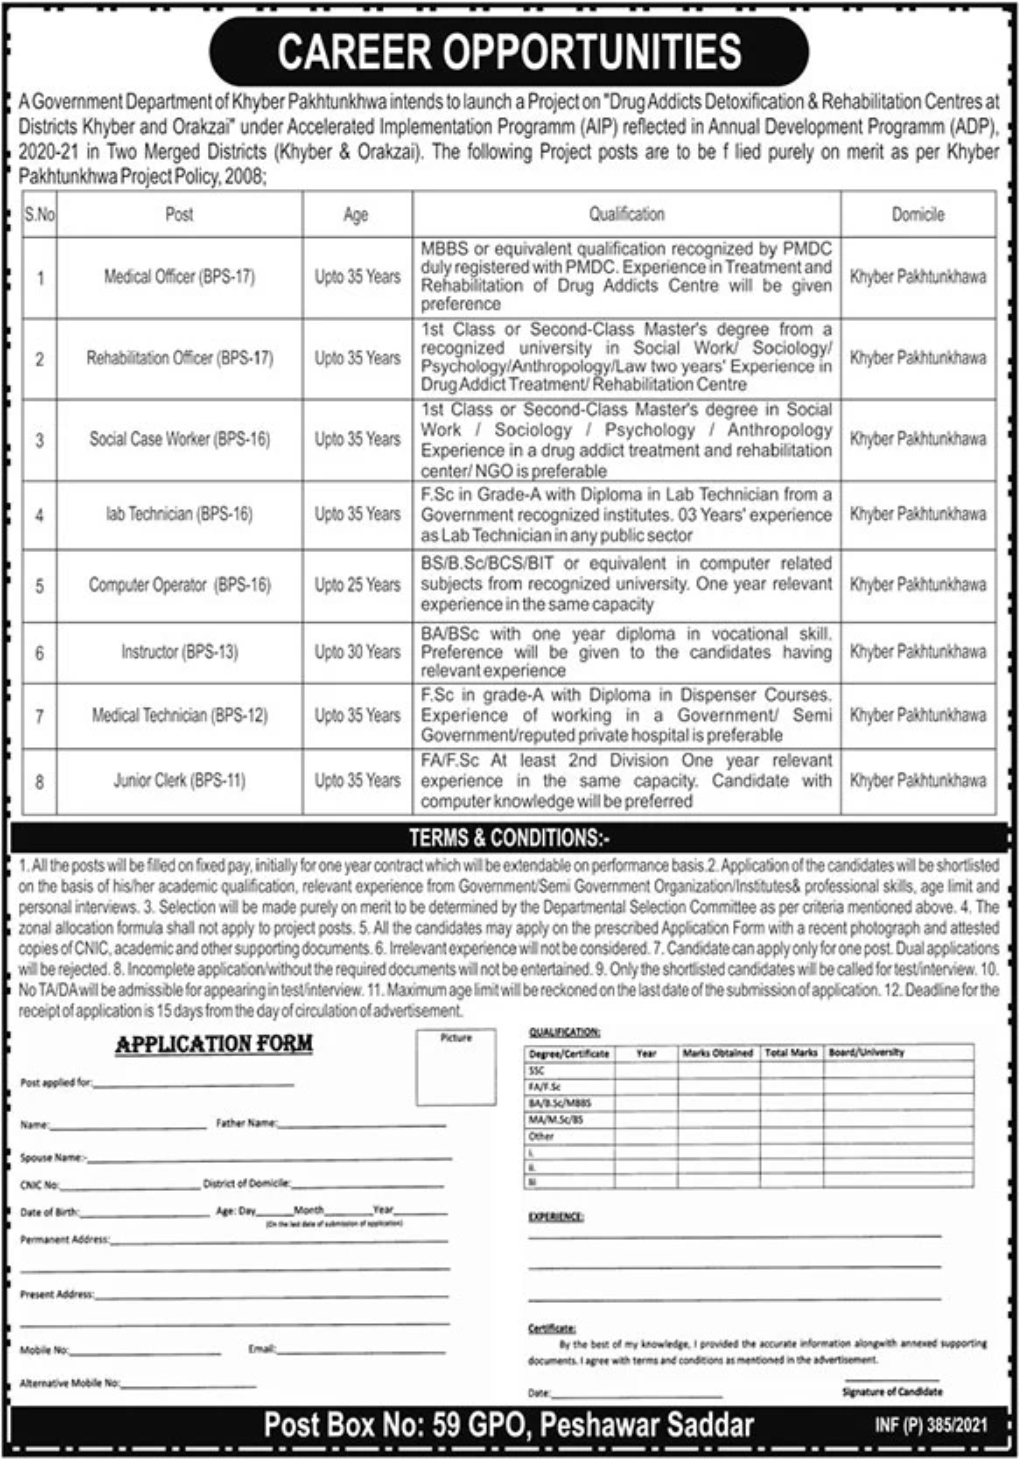 Jobs in Government Department of Khyber Pkhtunkhwa